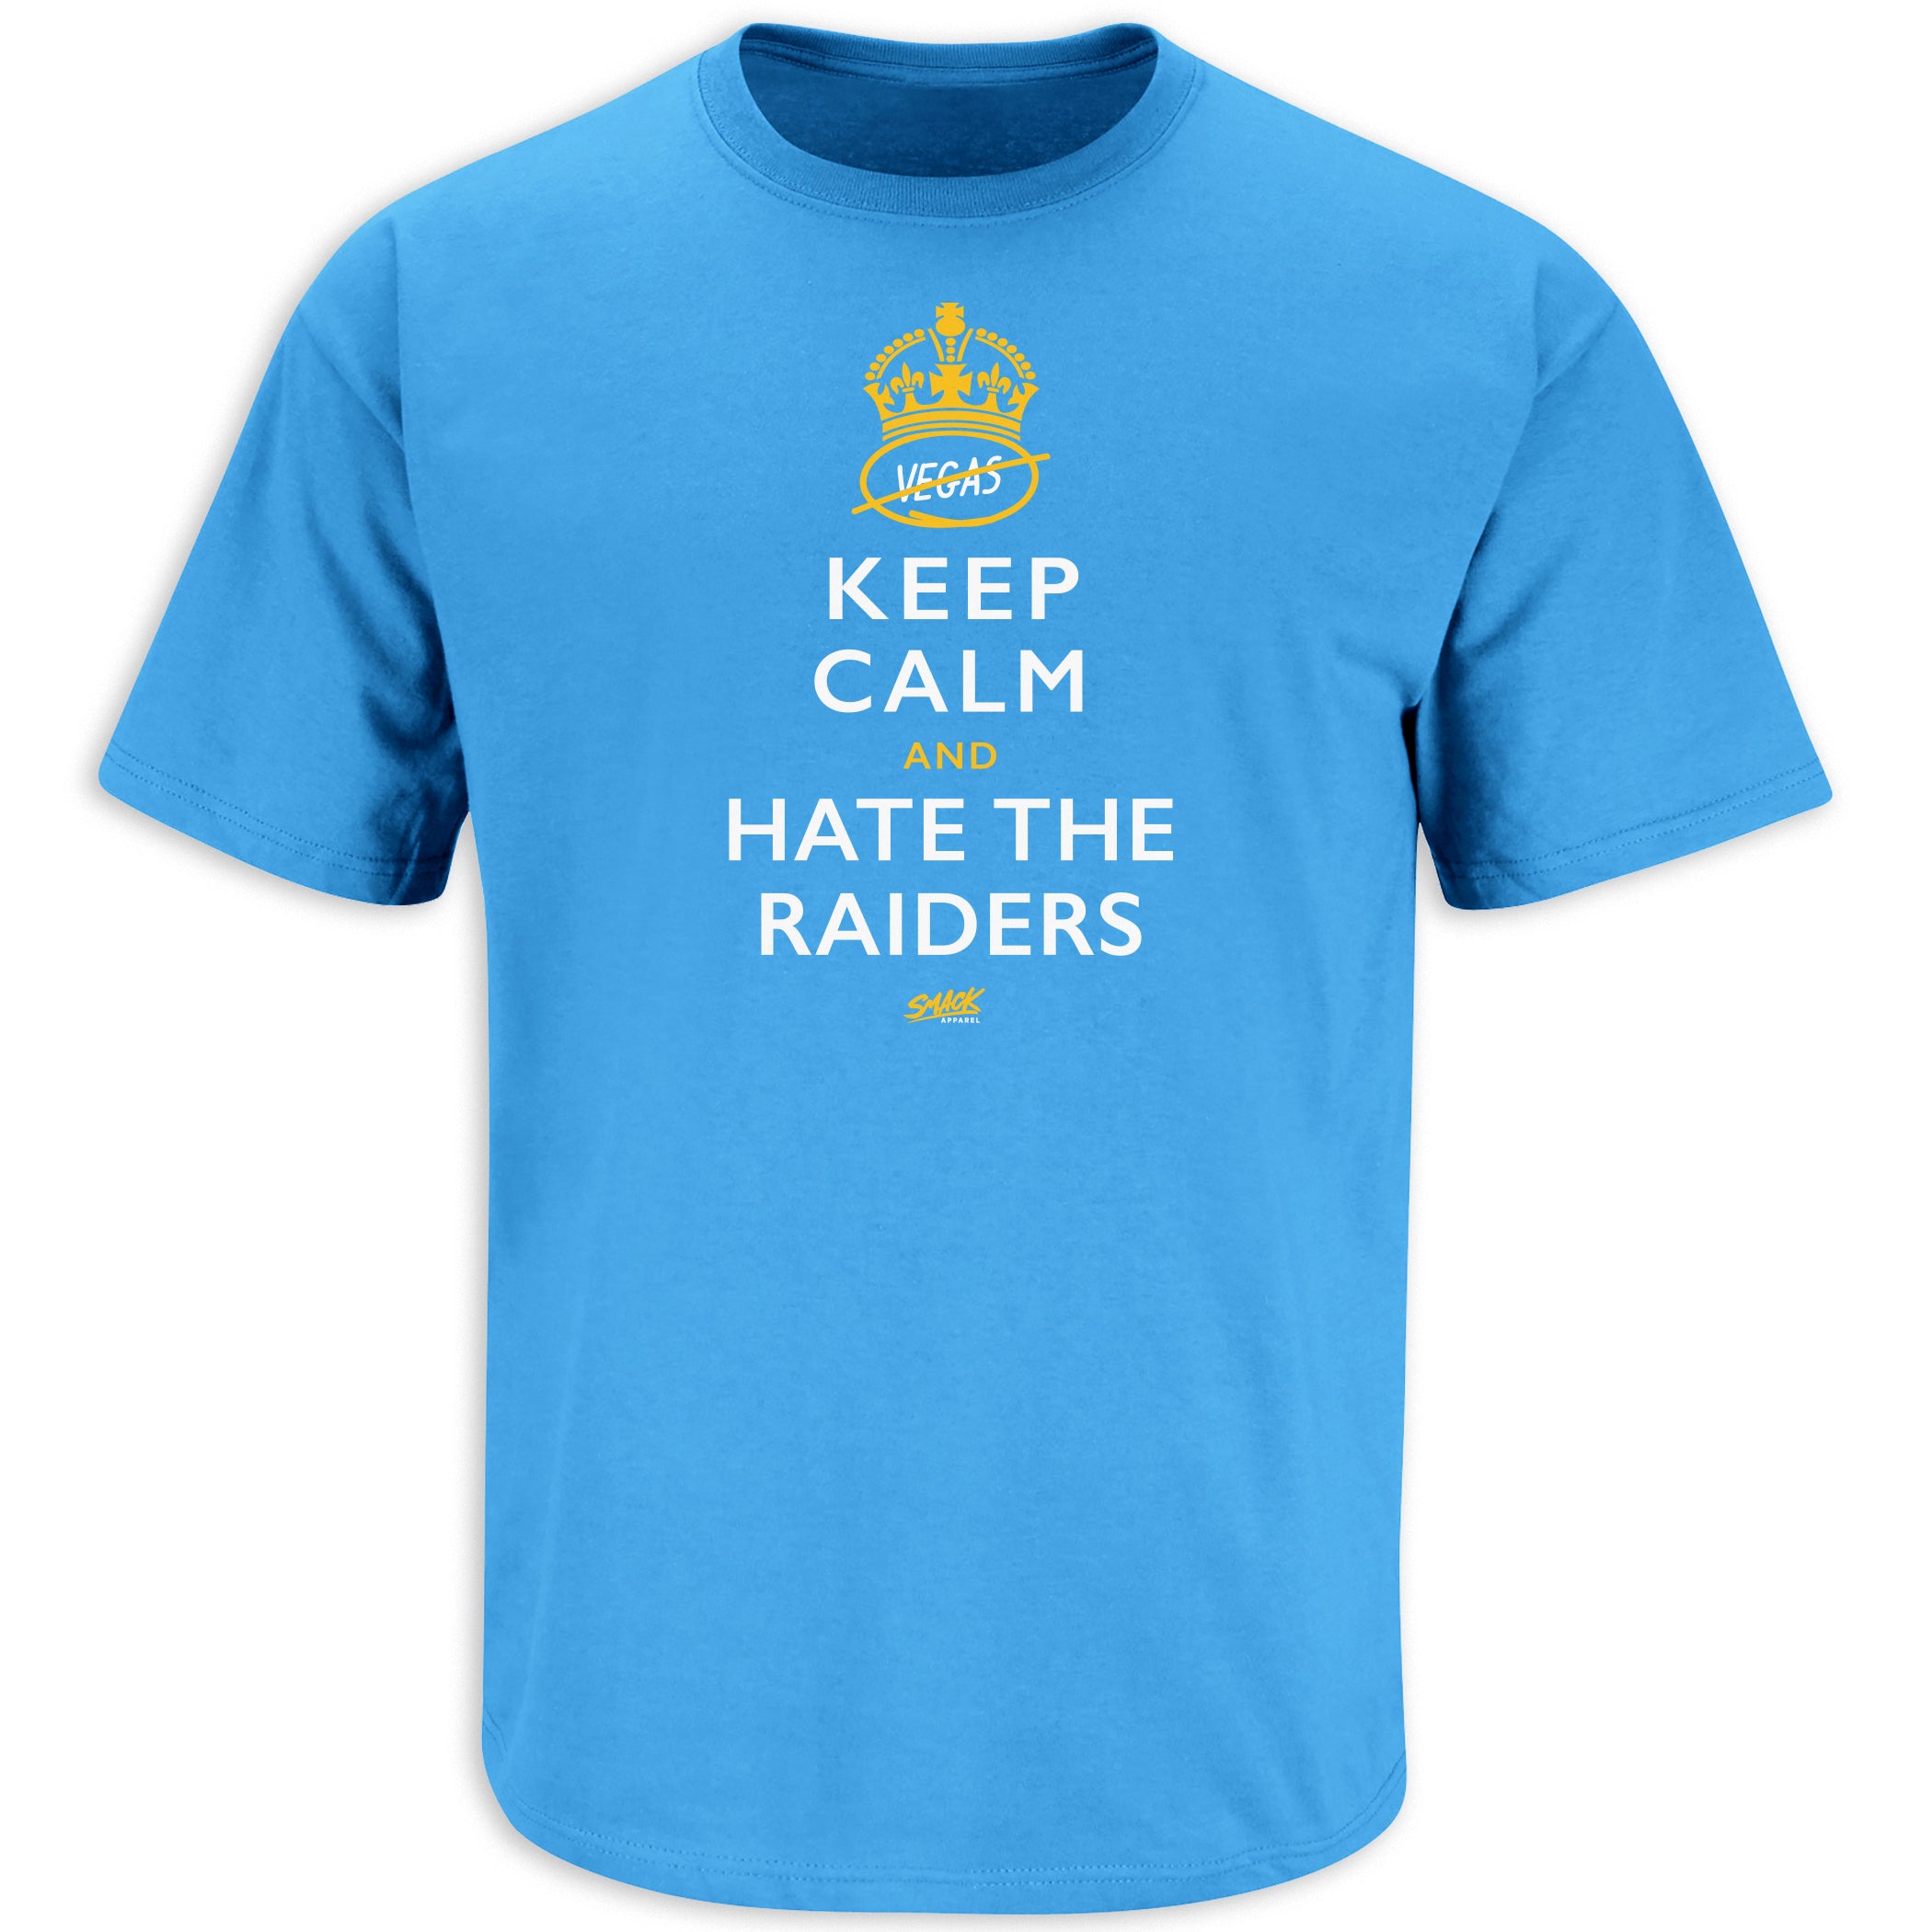 Smack Apparel Keep Calm and Hate The Raiders (Anti-Las Vegas) T-Shirt for La Football Fans Short Sleeve / Large / Light Blue